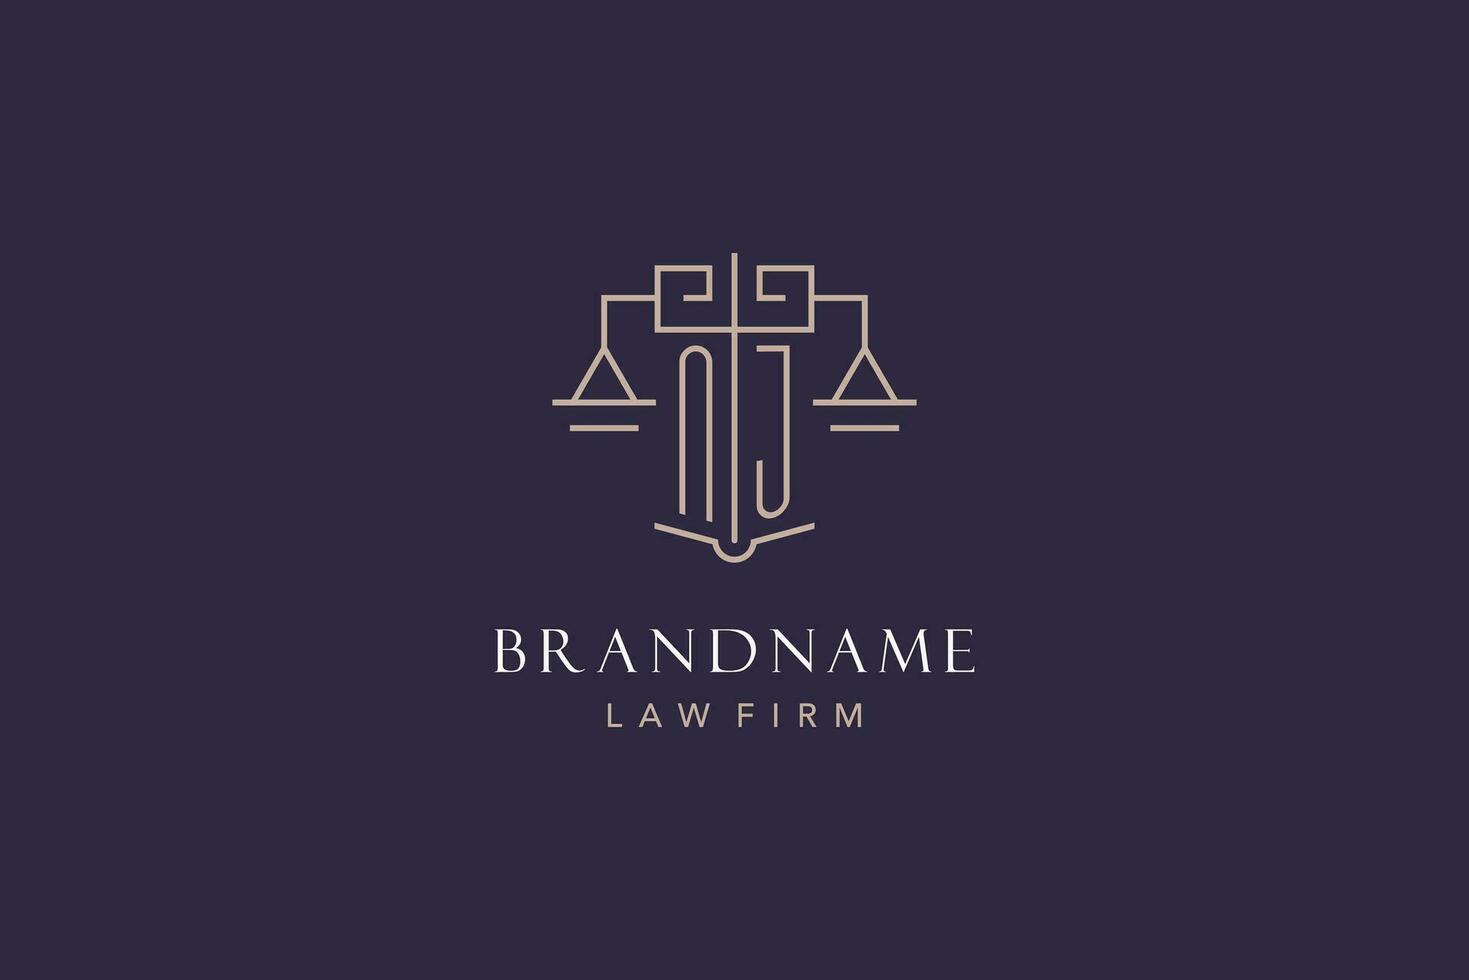 Initial letter NJ logo with scale of justice logo design, luxury legal logo geometric style vector